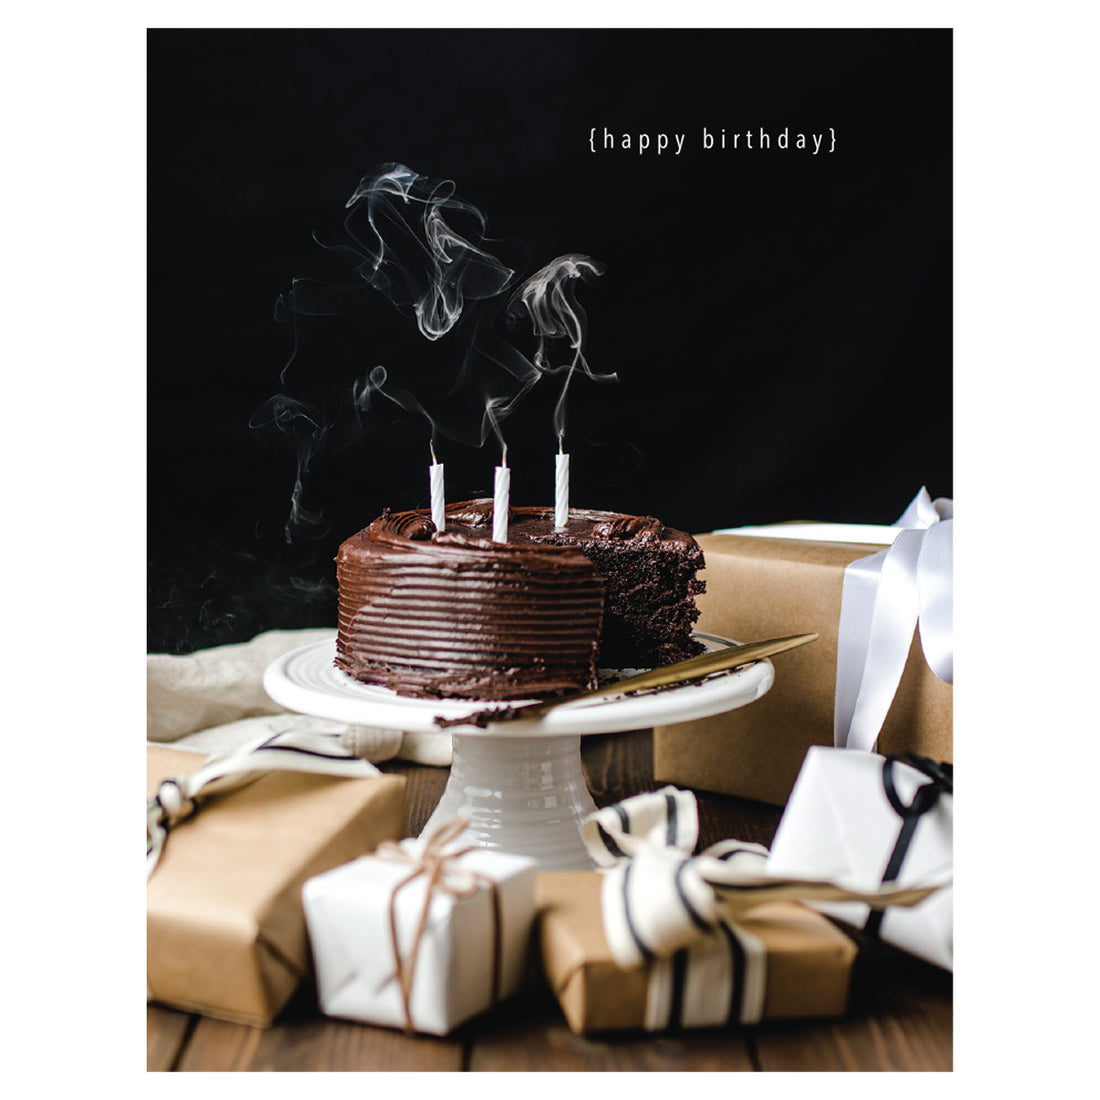 A photo of a chocolate cake on a cake stand, candles freshly blown out and smokey, on a table  surrounded by kraft-wrapped gifts in white ribbons on a black background, with &quot;{happy birthday}&quot; printed in white in the upper right of the card.